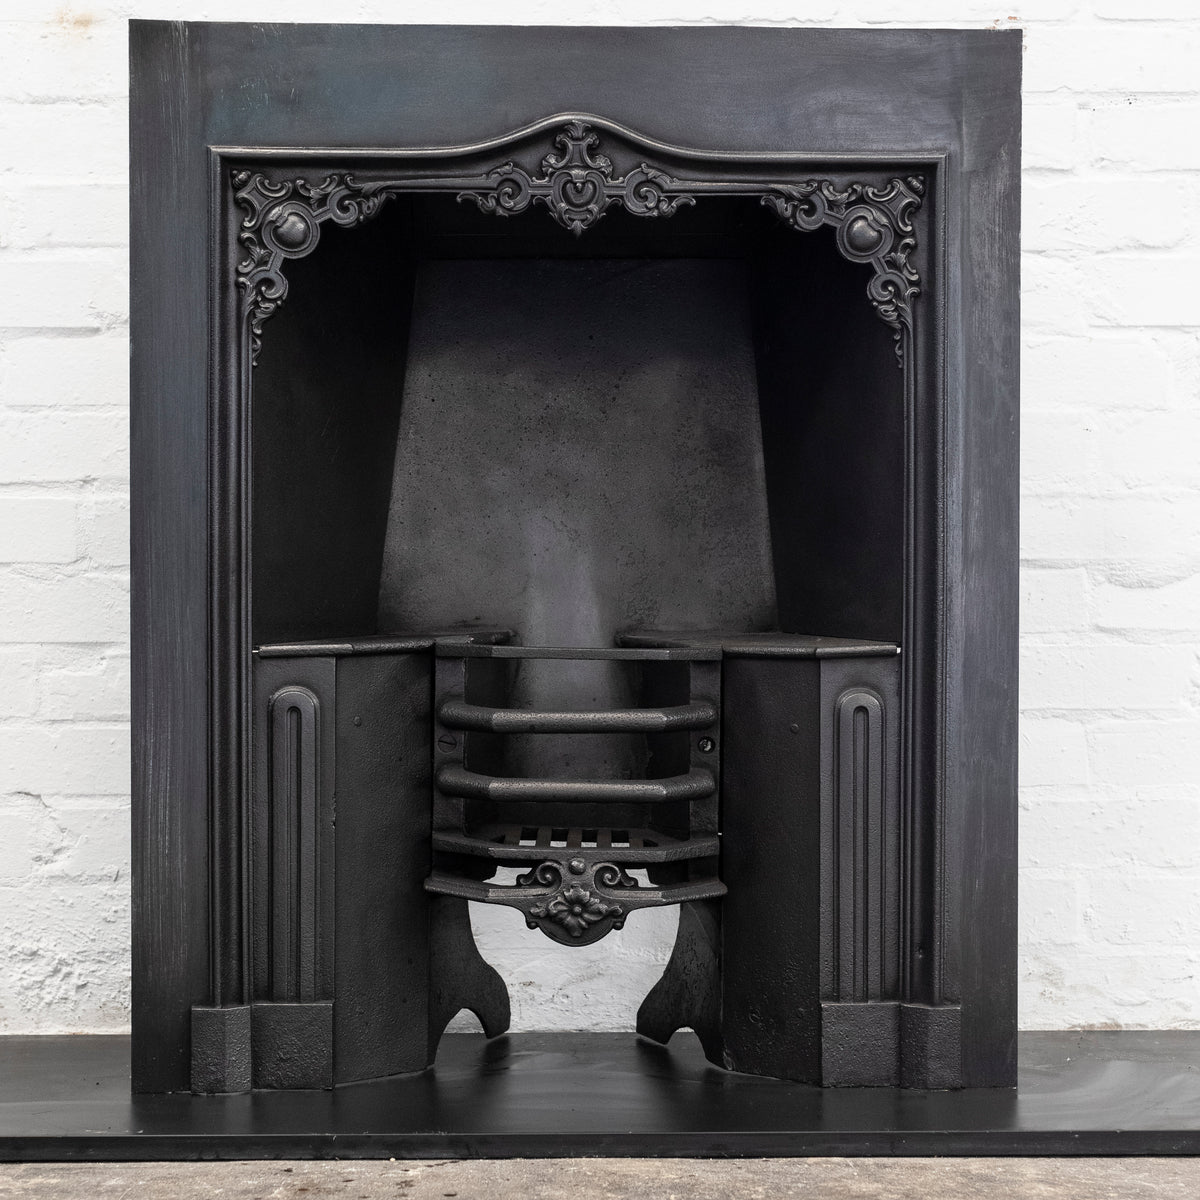 Antique Ornate Late Georgian / Early Victorian Cast Iron Insert | The Architectural Forum